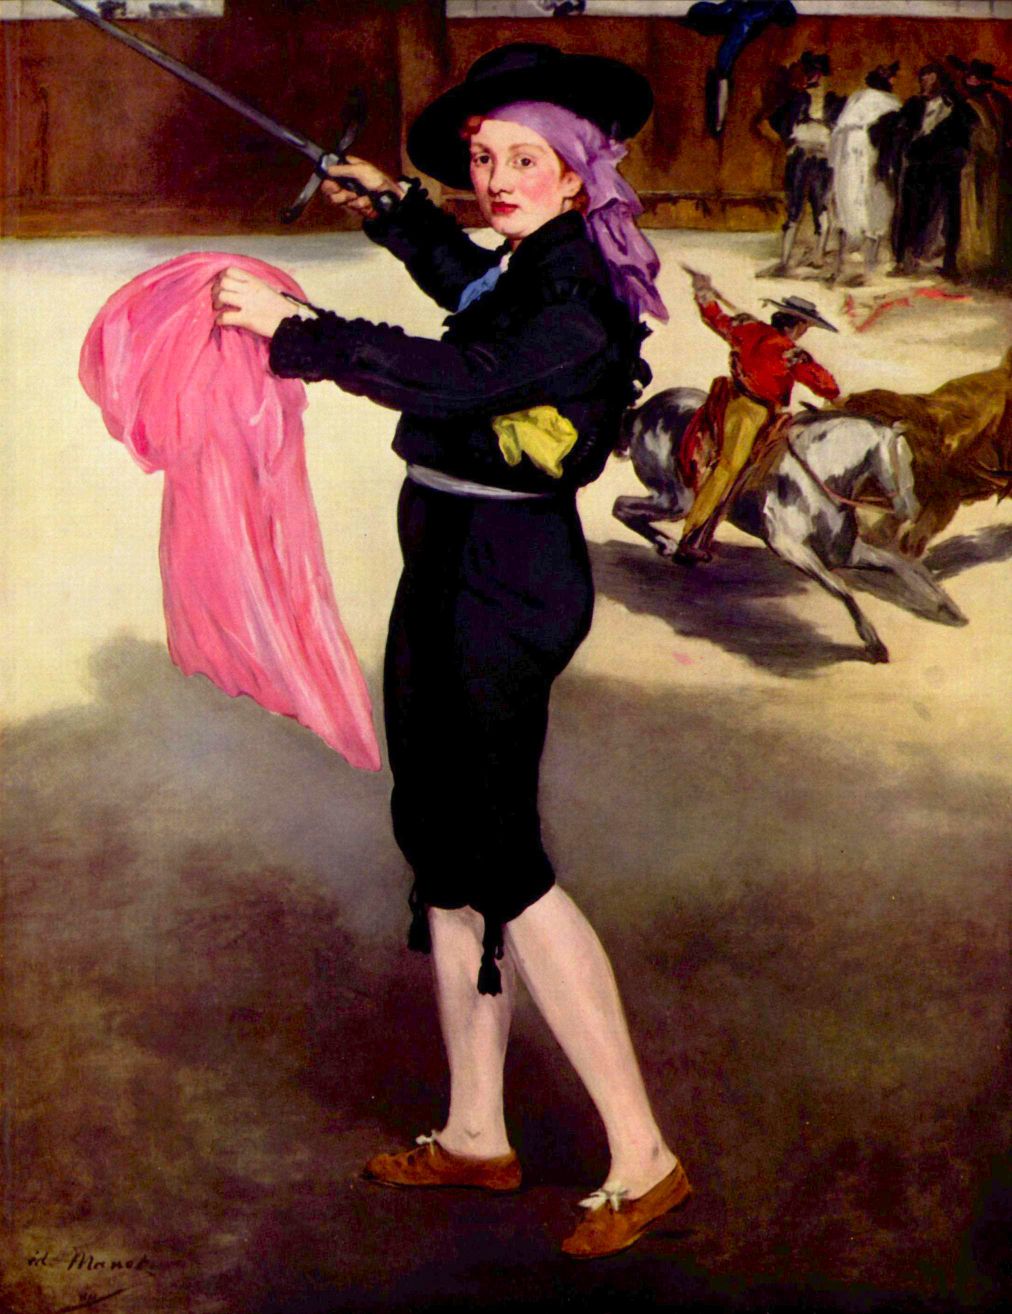 Édouard Manet - Mlle. Victorine in the Costume of a Matador by Manet